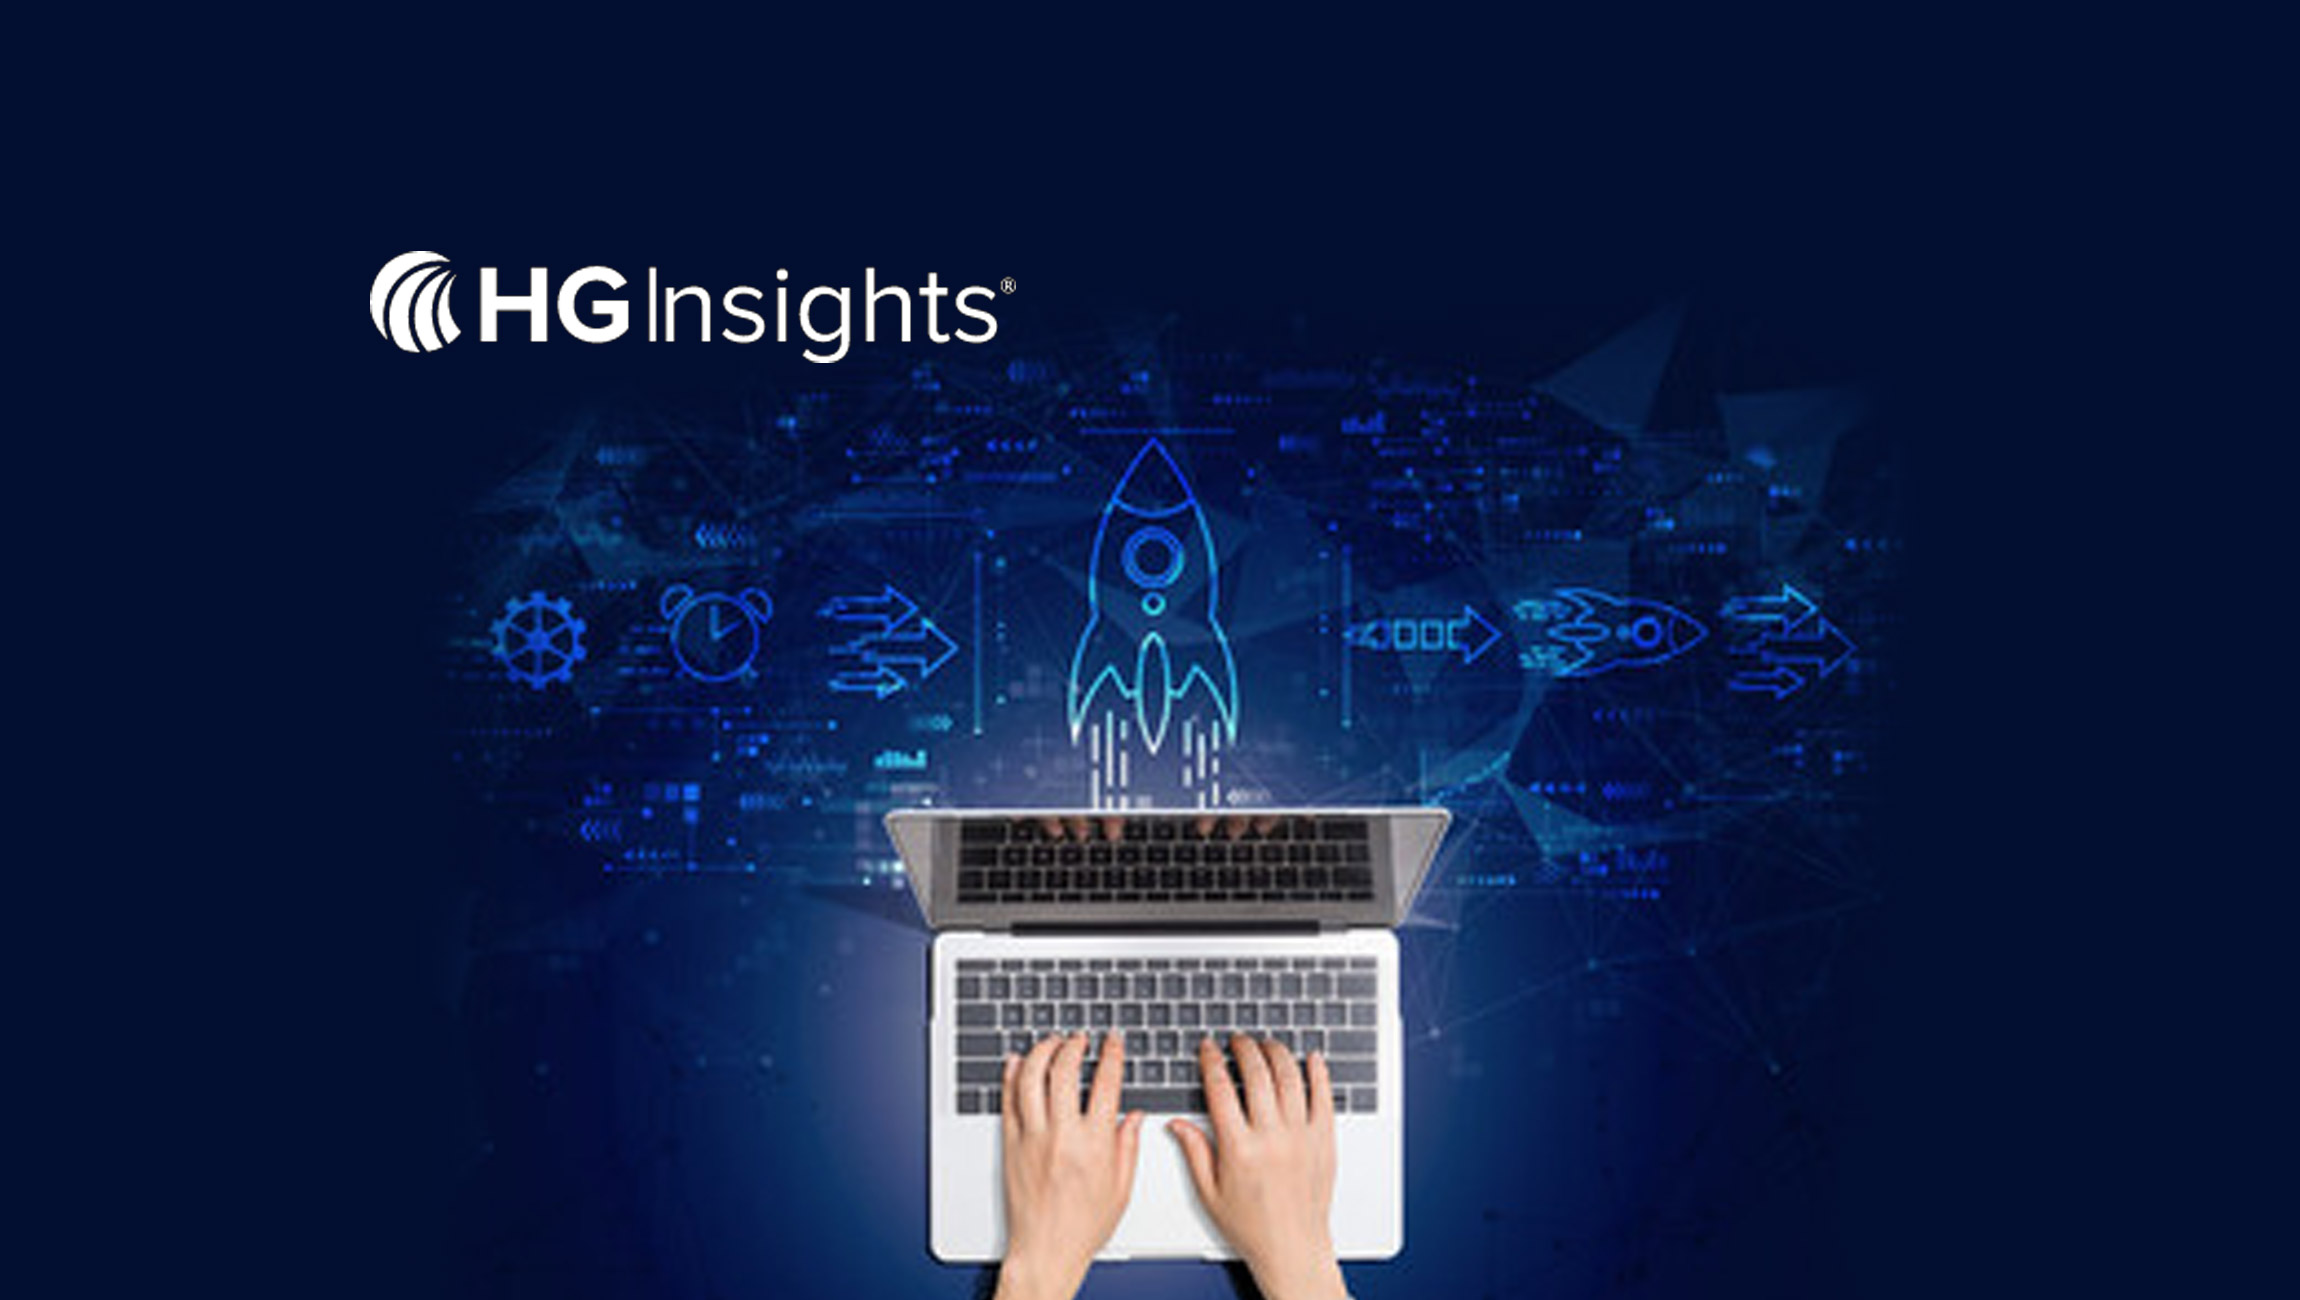 On the Go - Insight Platforms